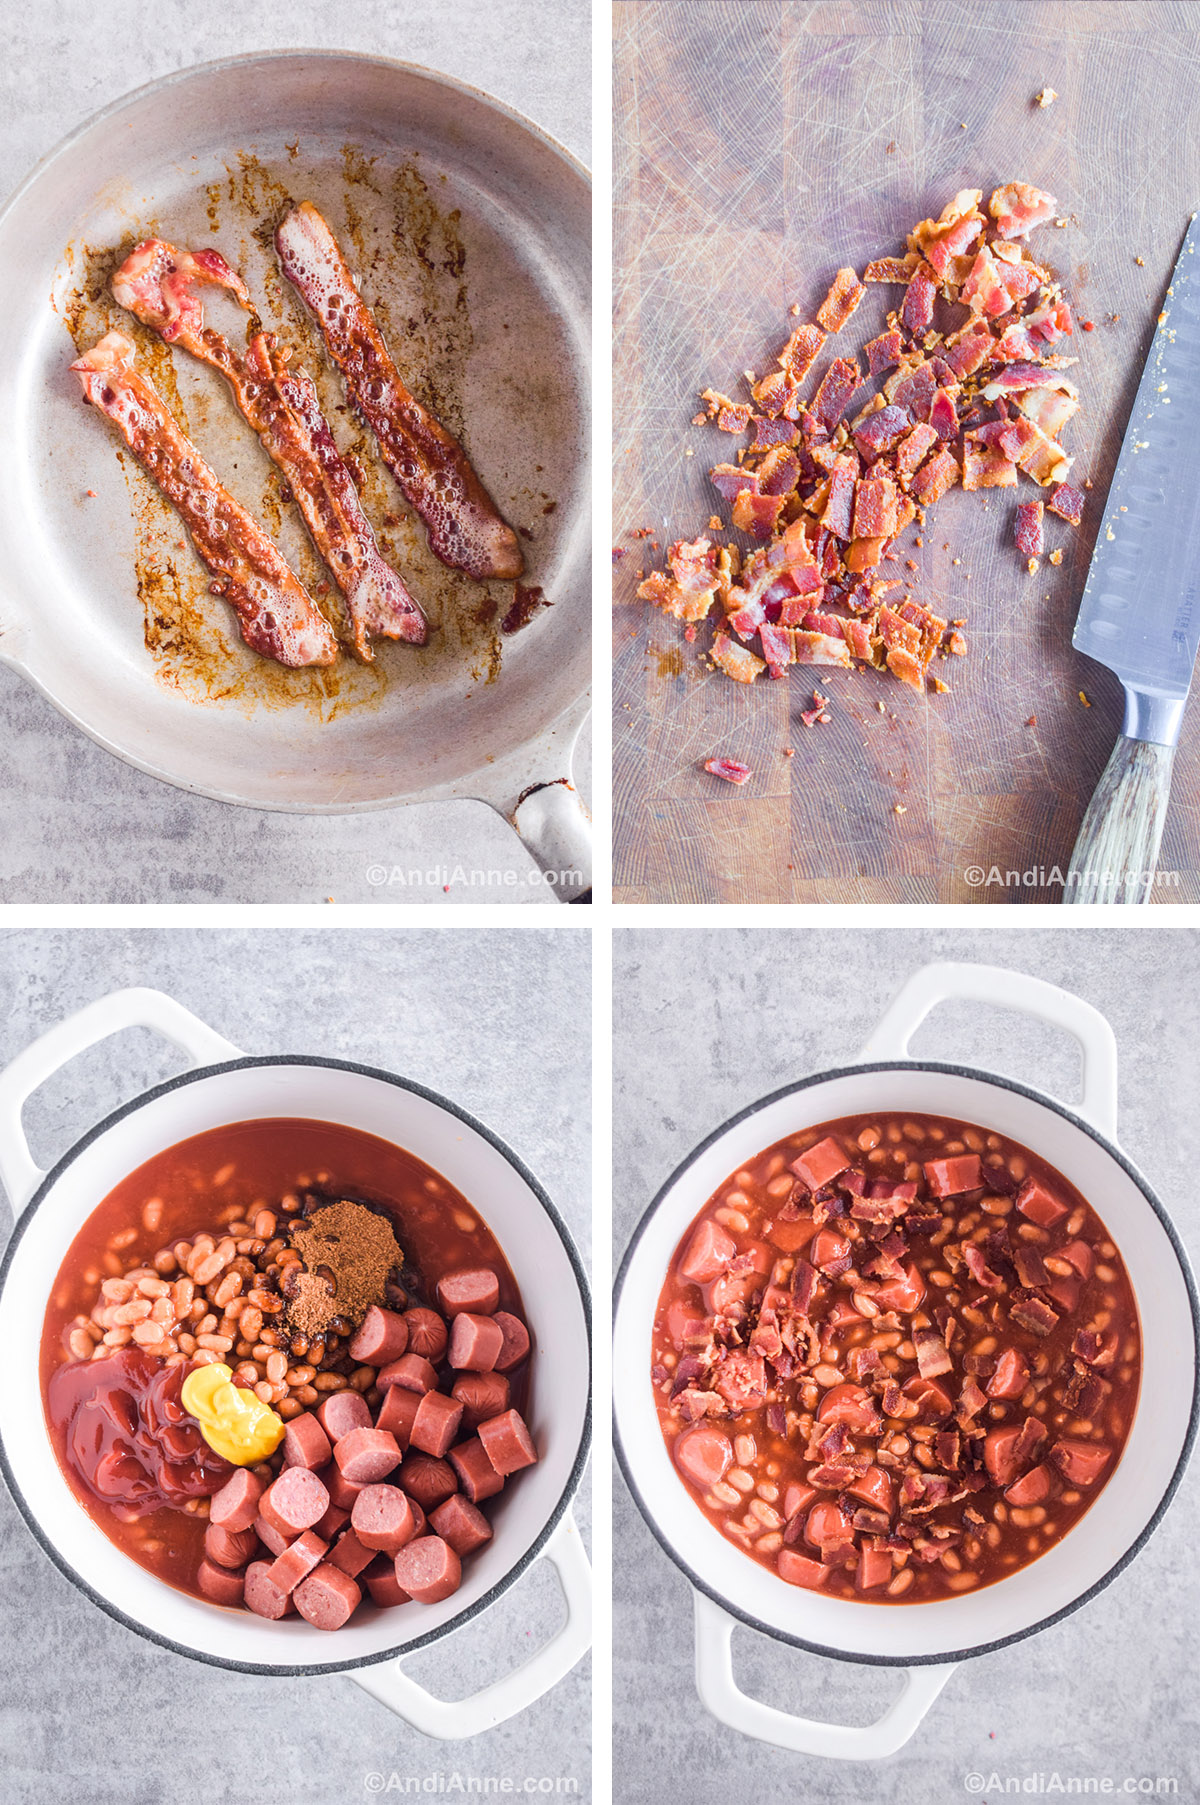 Four images showing steps to make recipe. Bacon cooking in a frying pan. Crumbled bacon with a knife on a cutting board. Beans, chopped wieners, ketchup, mustard and brown sugar in a white pot. Final wieners and beans recipe in white pot with crumbled bacon on top.